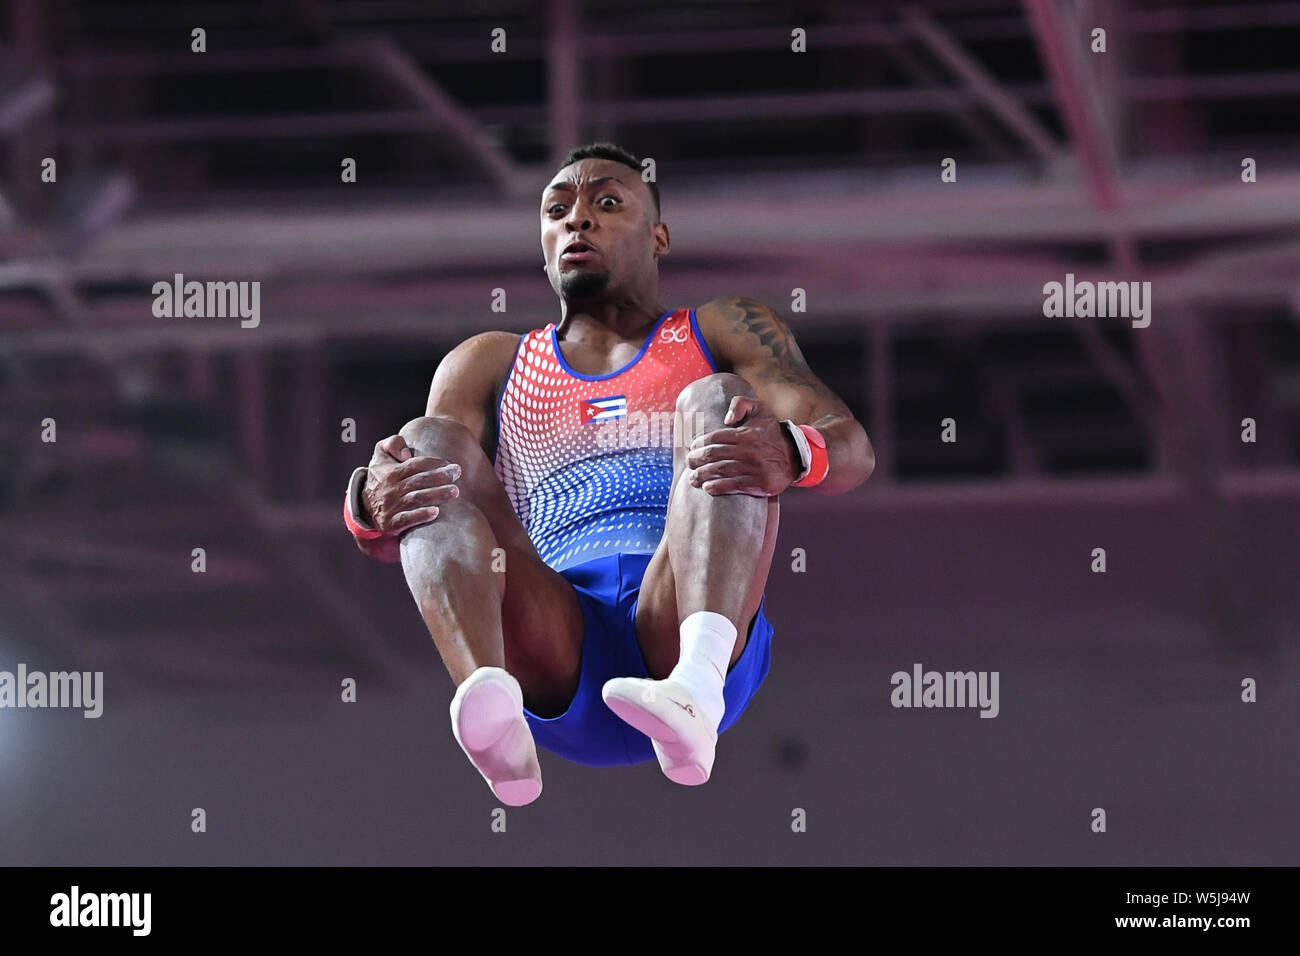 July 28, 2019, Lima, Peru: RANDY LERU from Cuba competes on the floor exercise during the team finals competition held in the Polideportivo Villa El Salvador in Lima, Peru. Credit: Amy Sanderson/ZUMA Wire/Alamy Live News Stock Photo